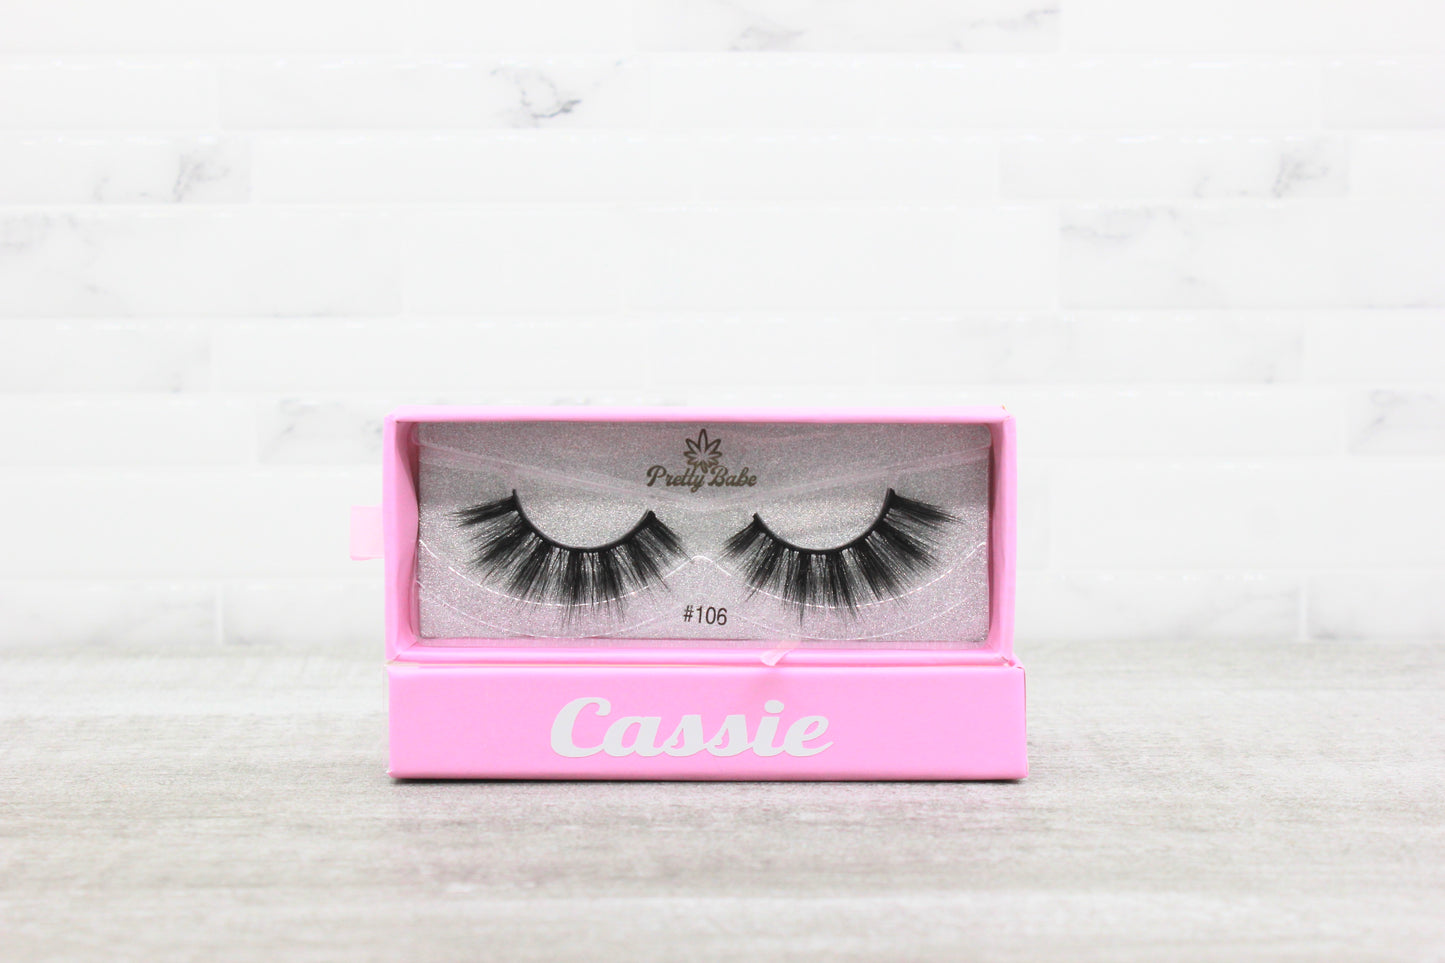 PrettyBabe's Luxury Faux Mink Lashes